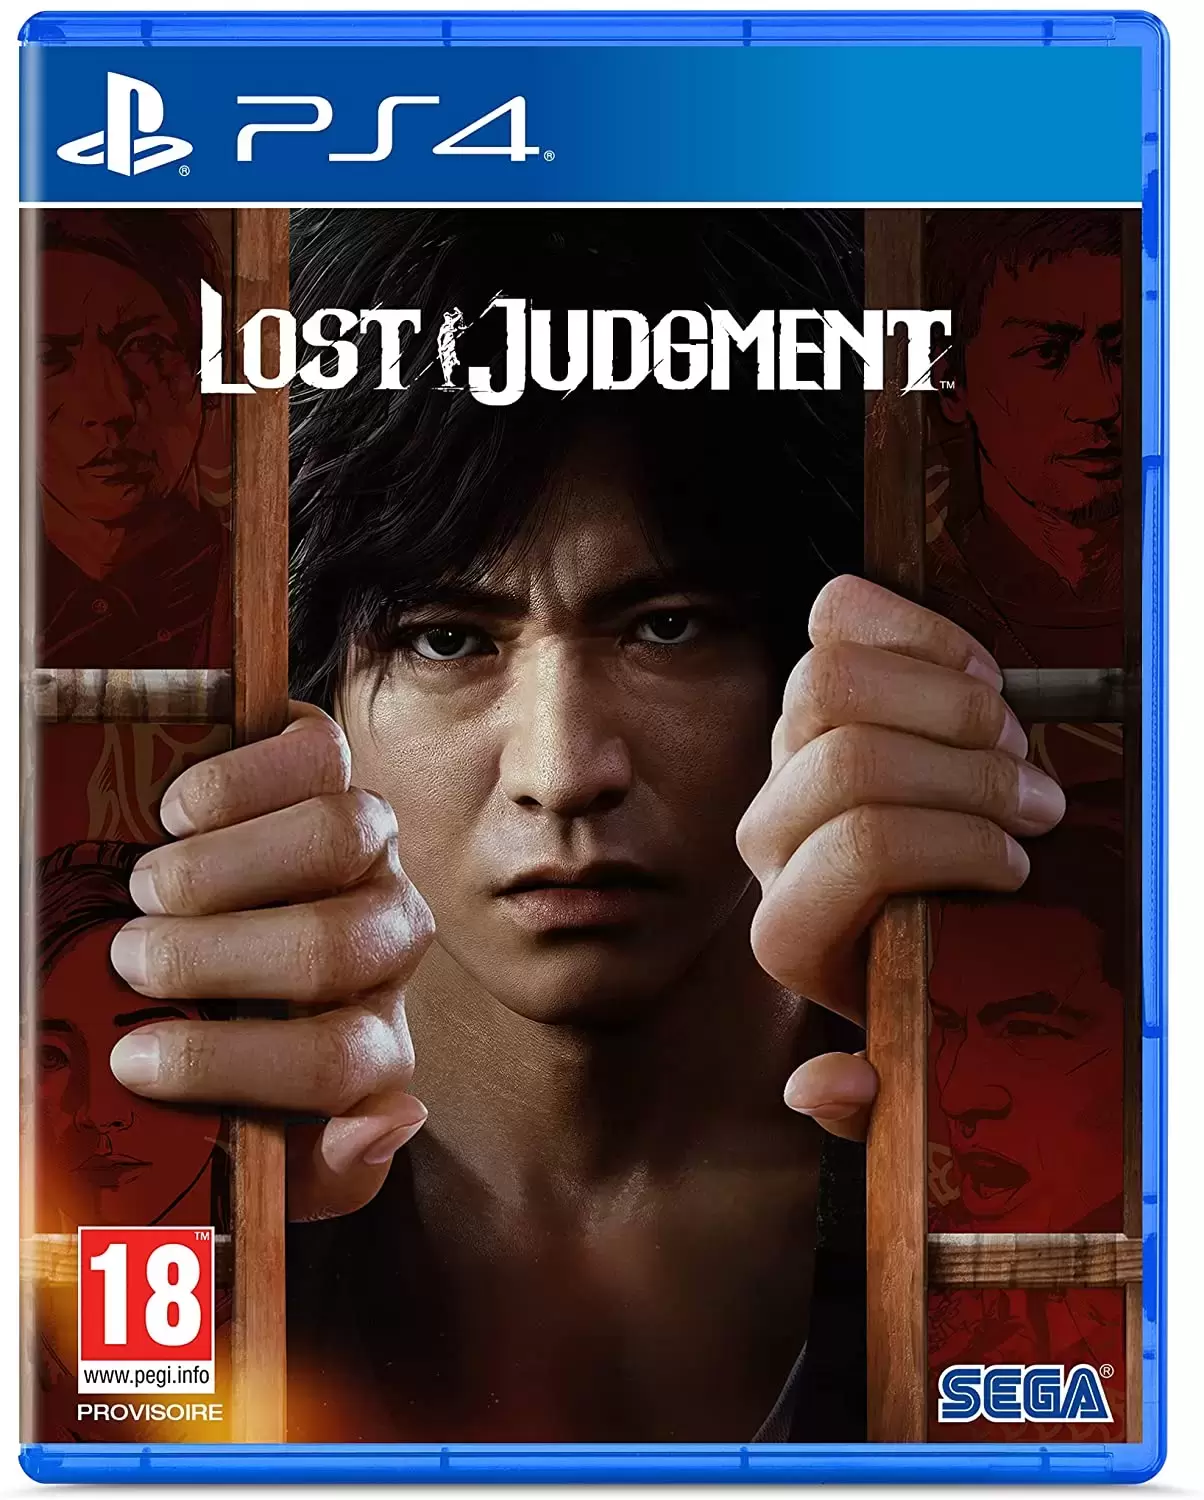 PS4 Games - Lost Judgment